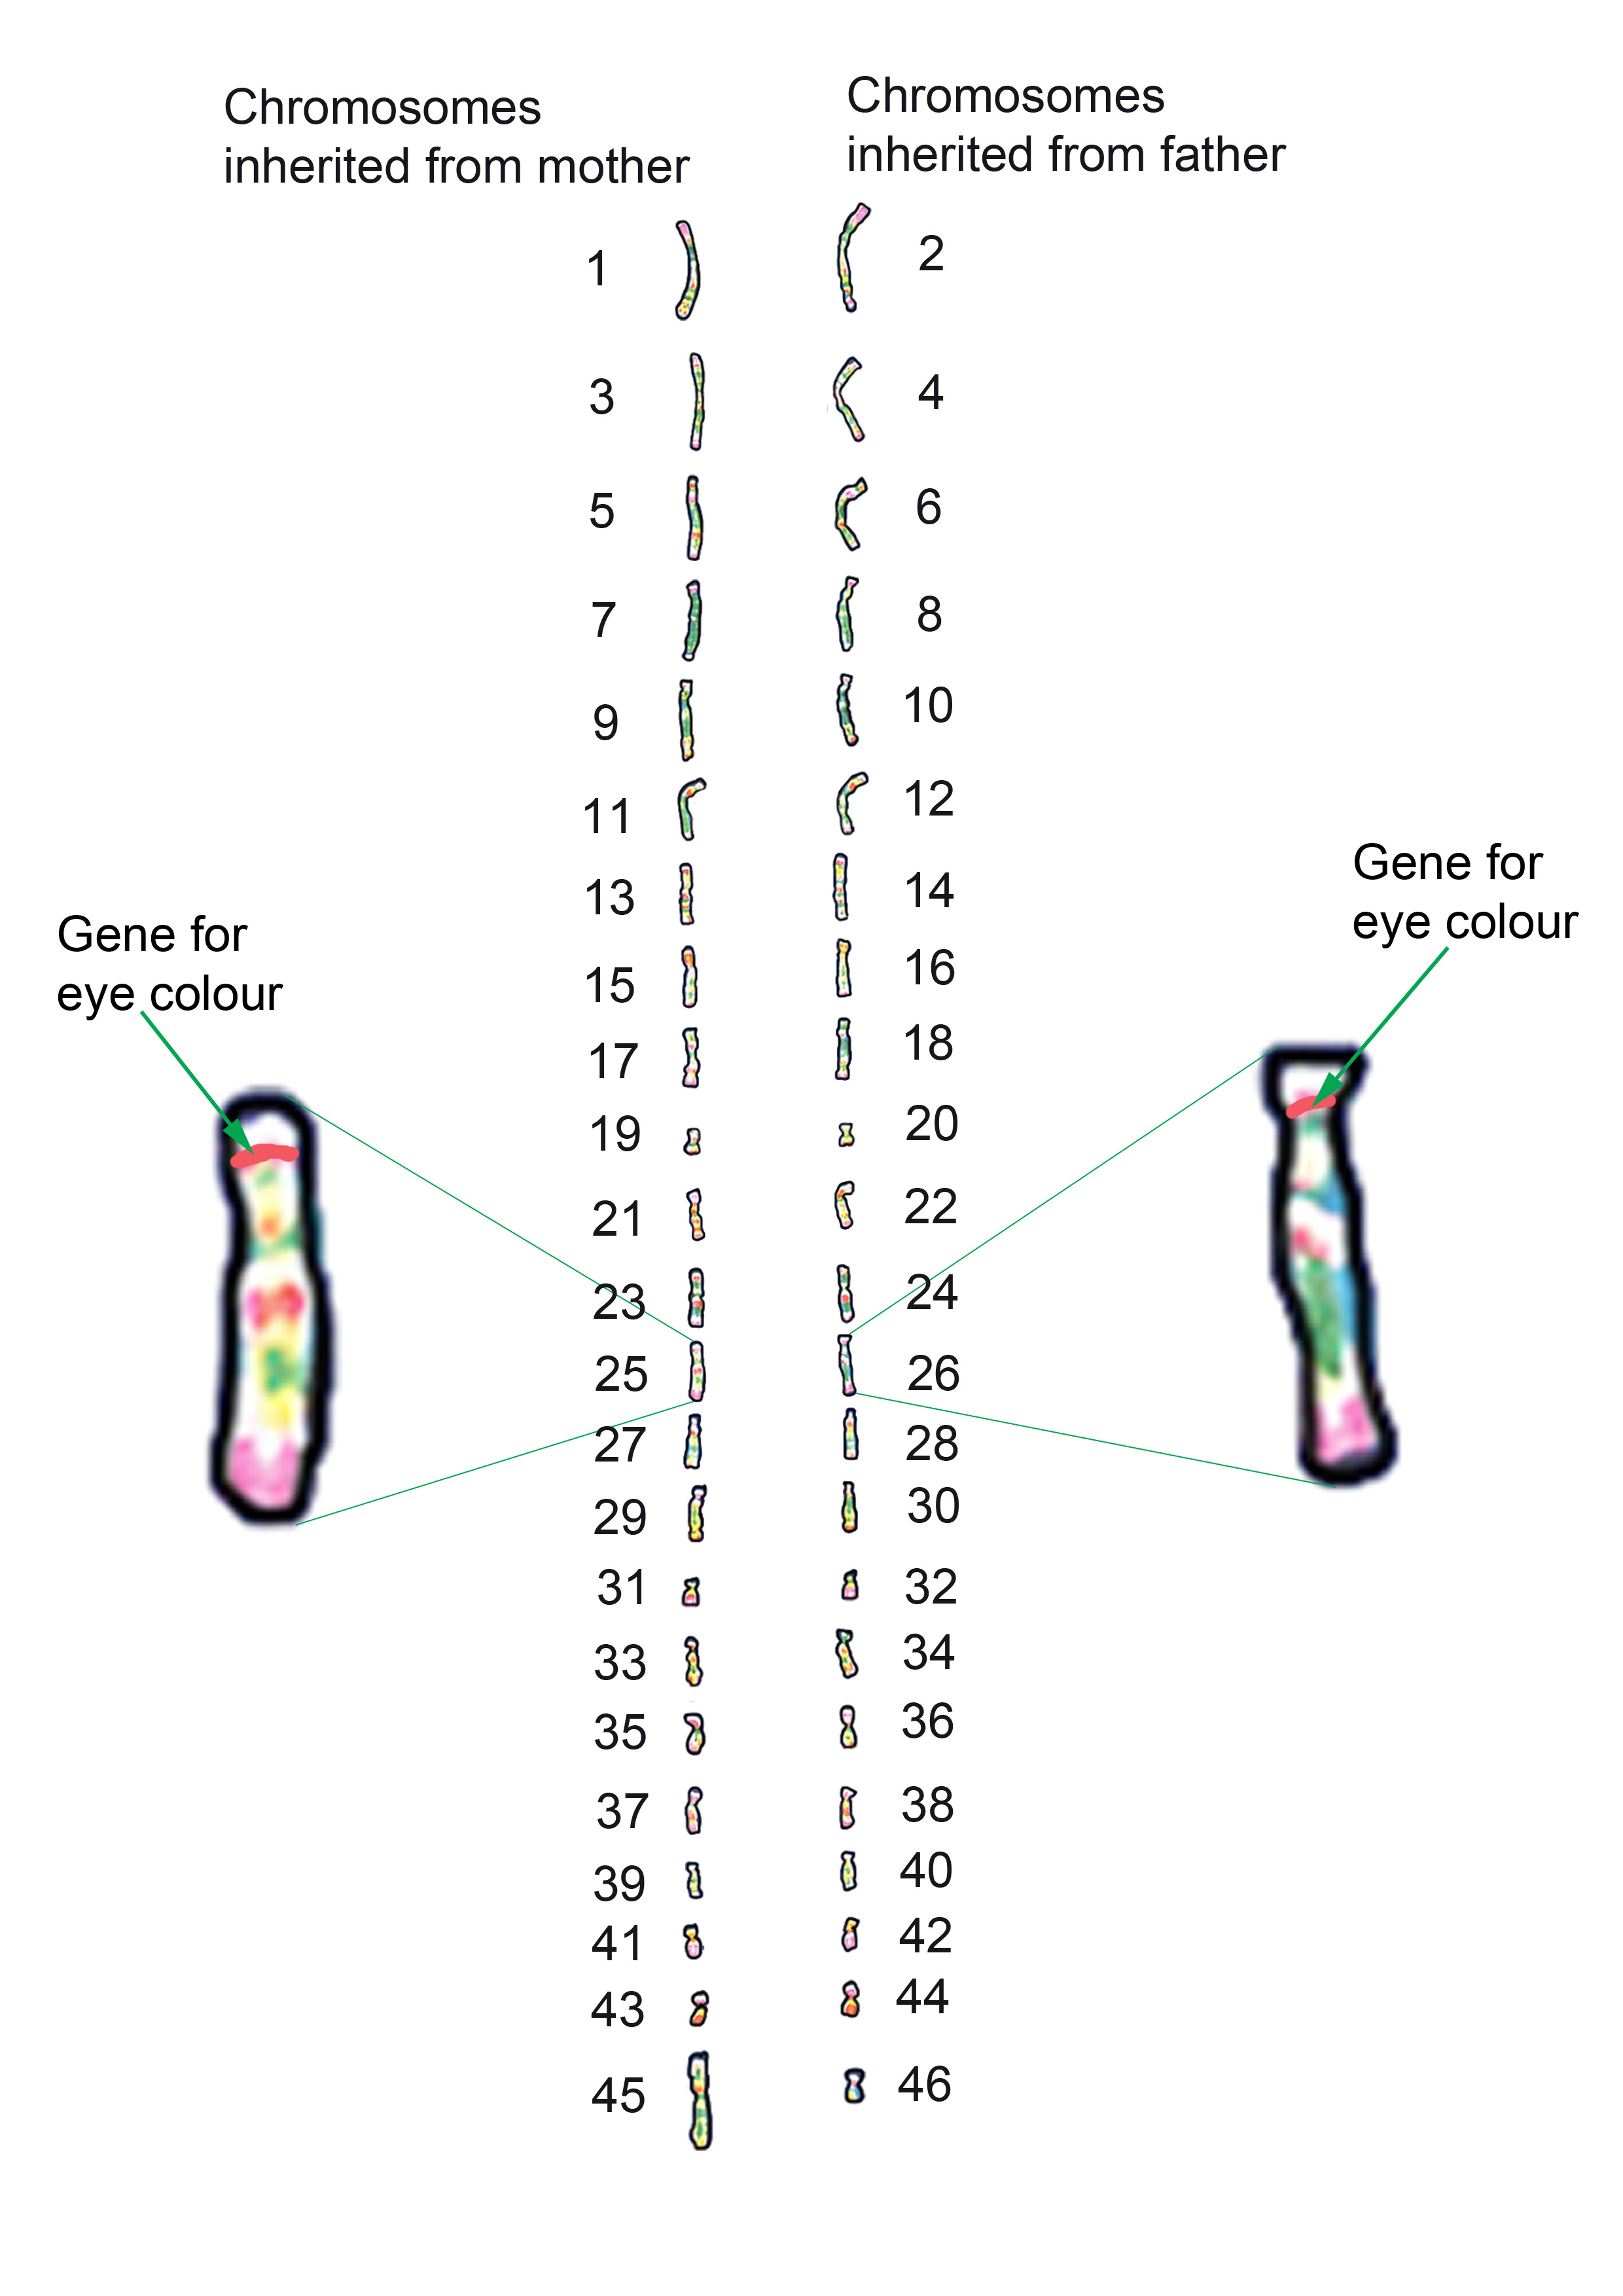 Each chromosome is paired one from mother and one from father